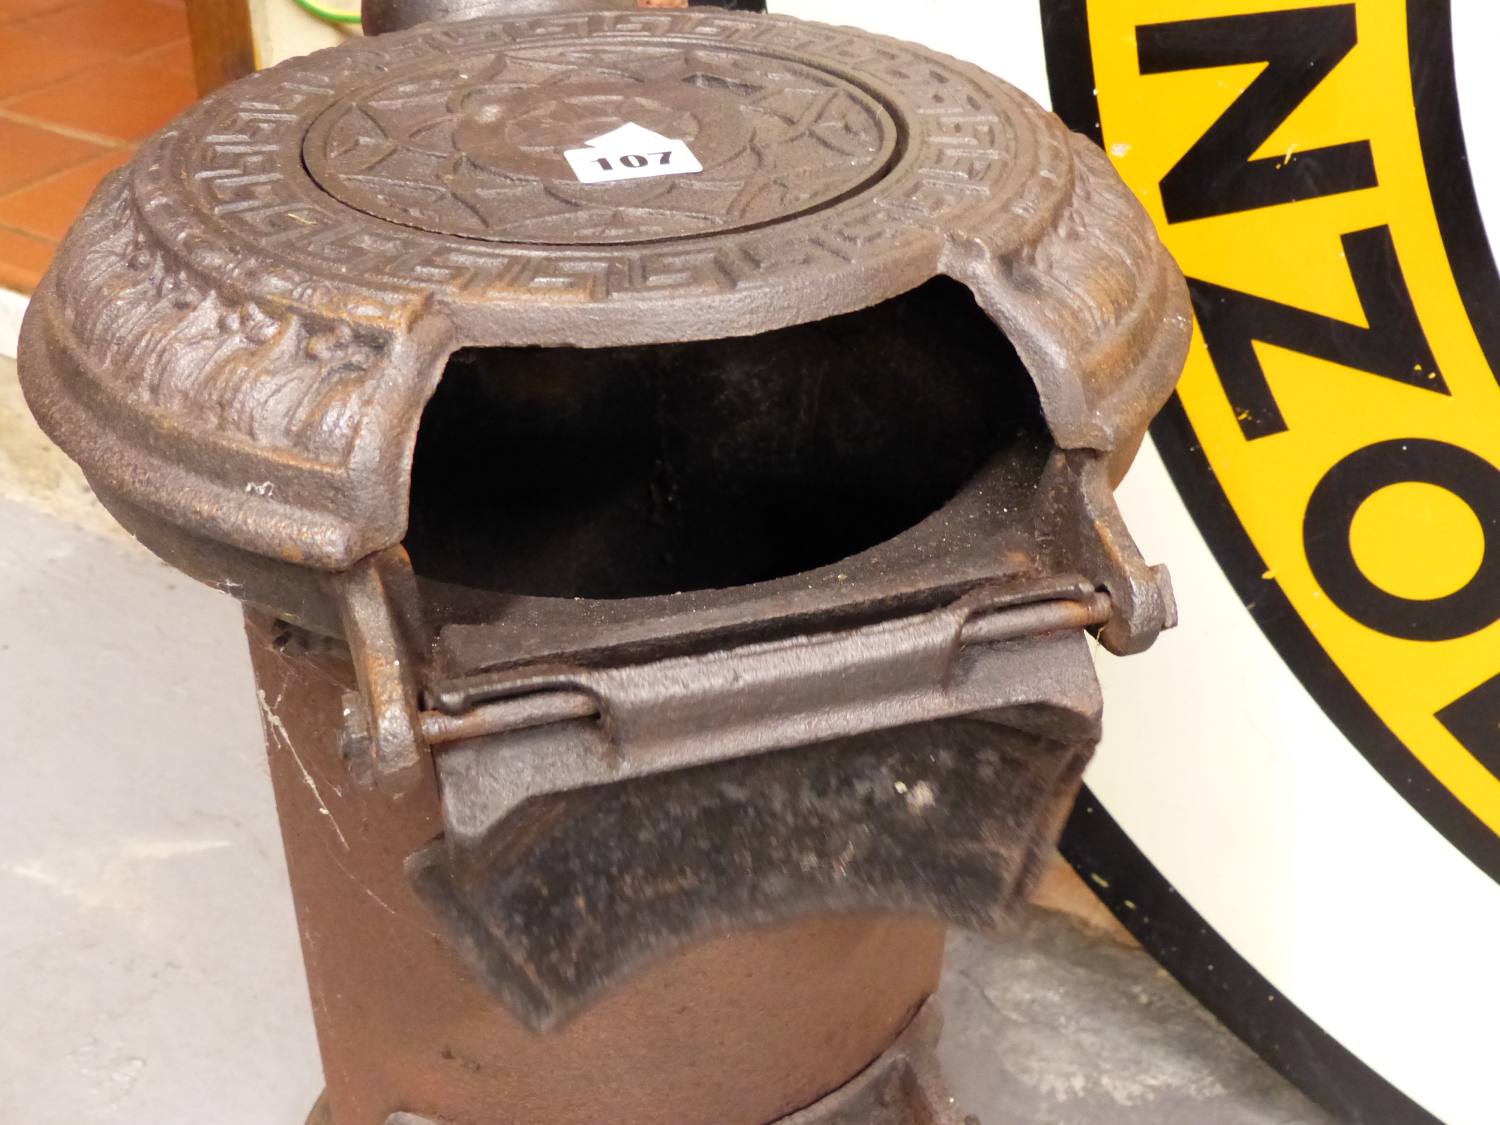 AN ANTIQUE CAST IRON TORTOISE STOVE FOR A SHEPHERDS HUT OR ROMANY WAGON. - Image 3 of 5